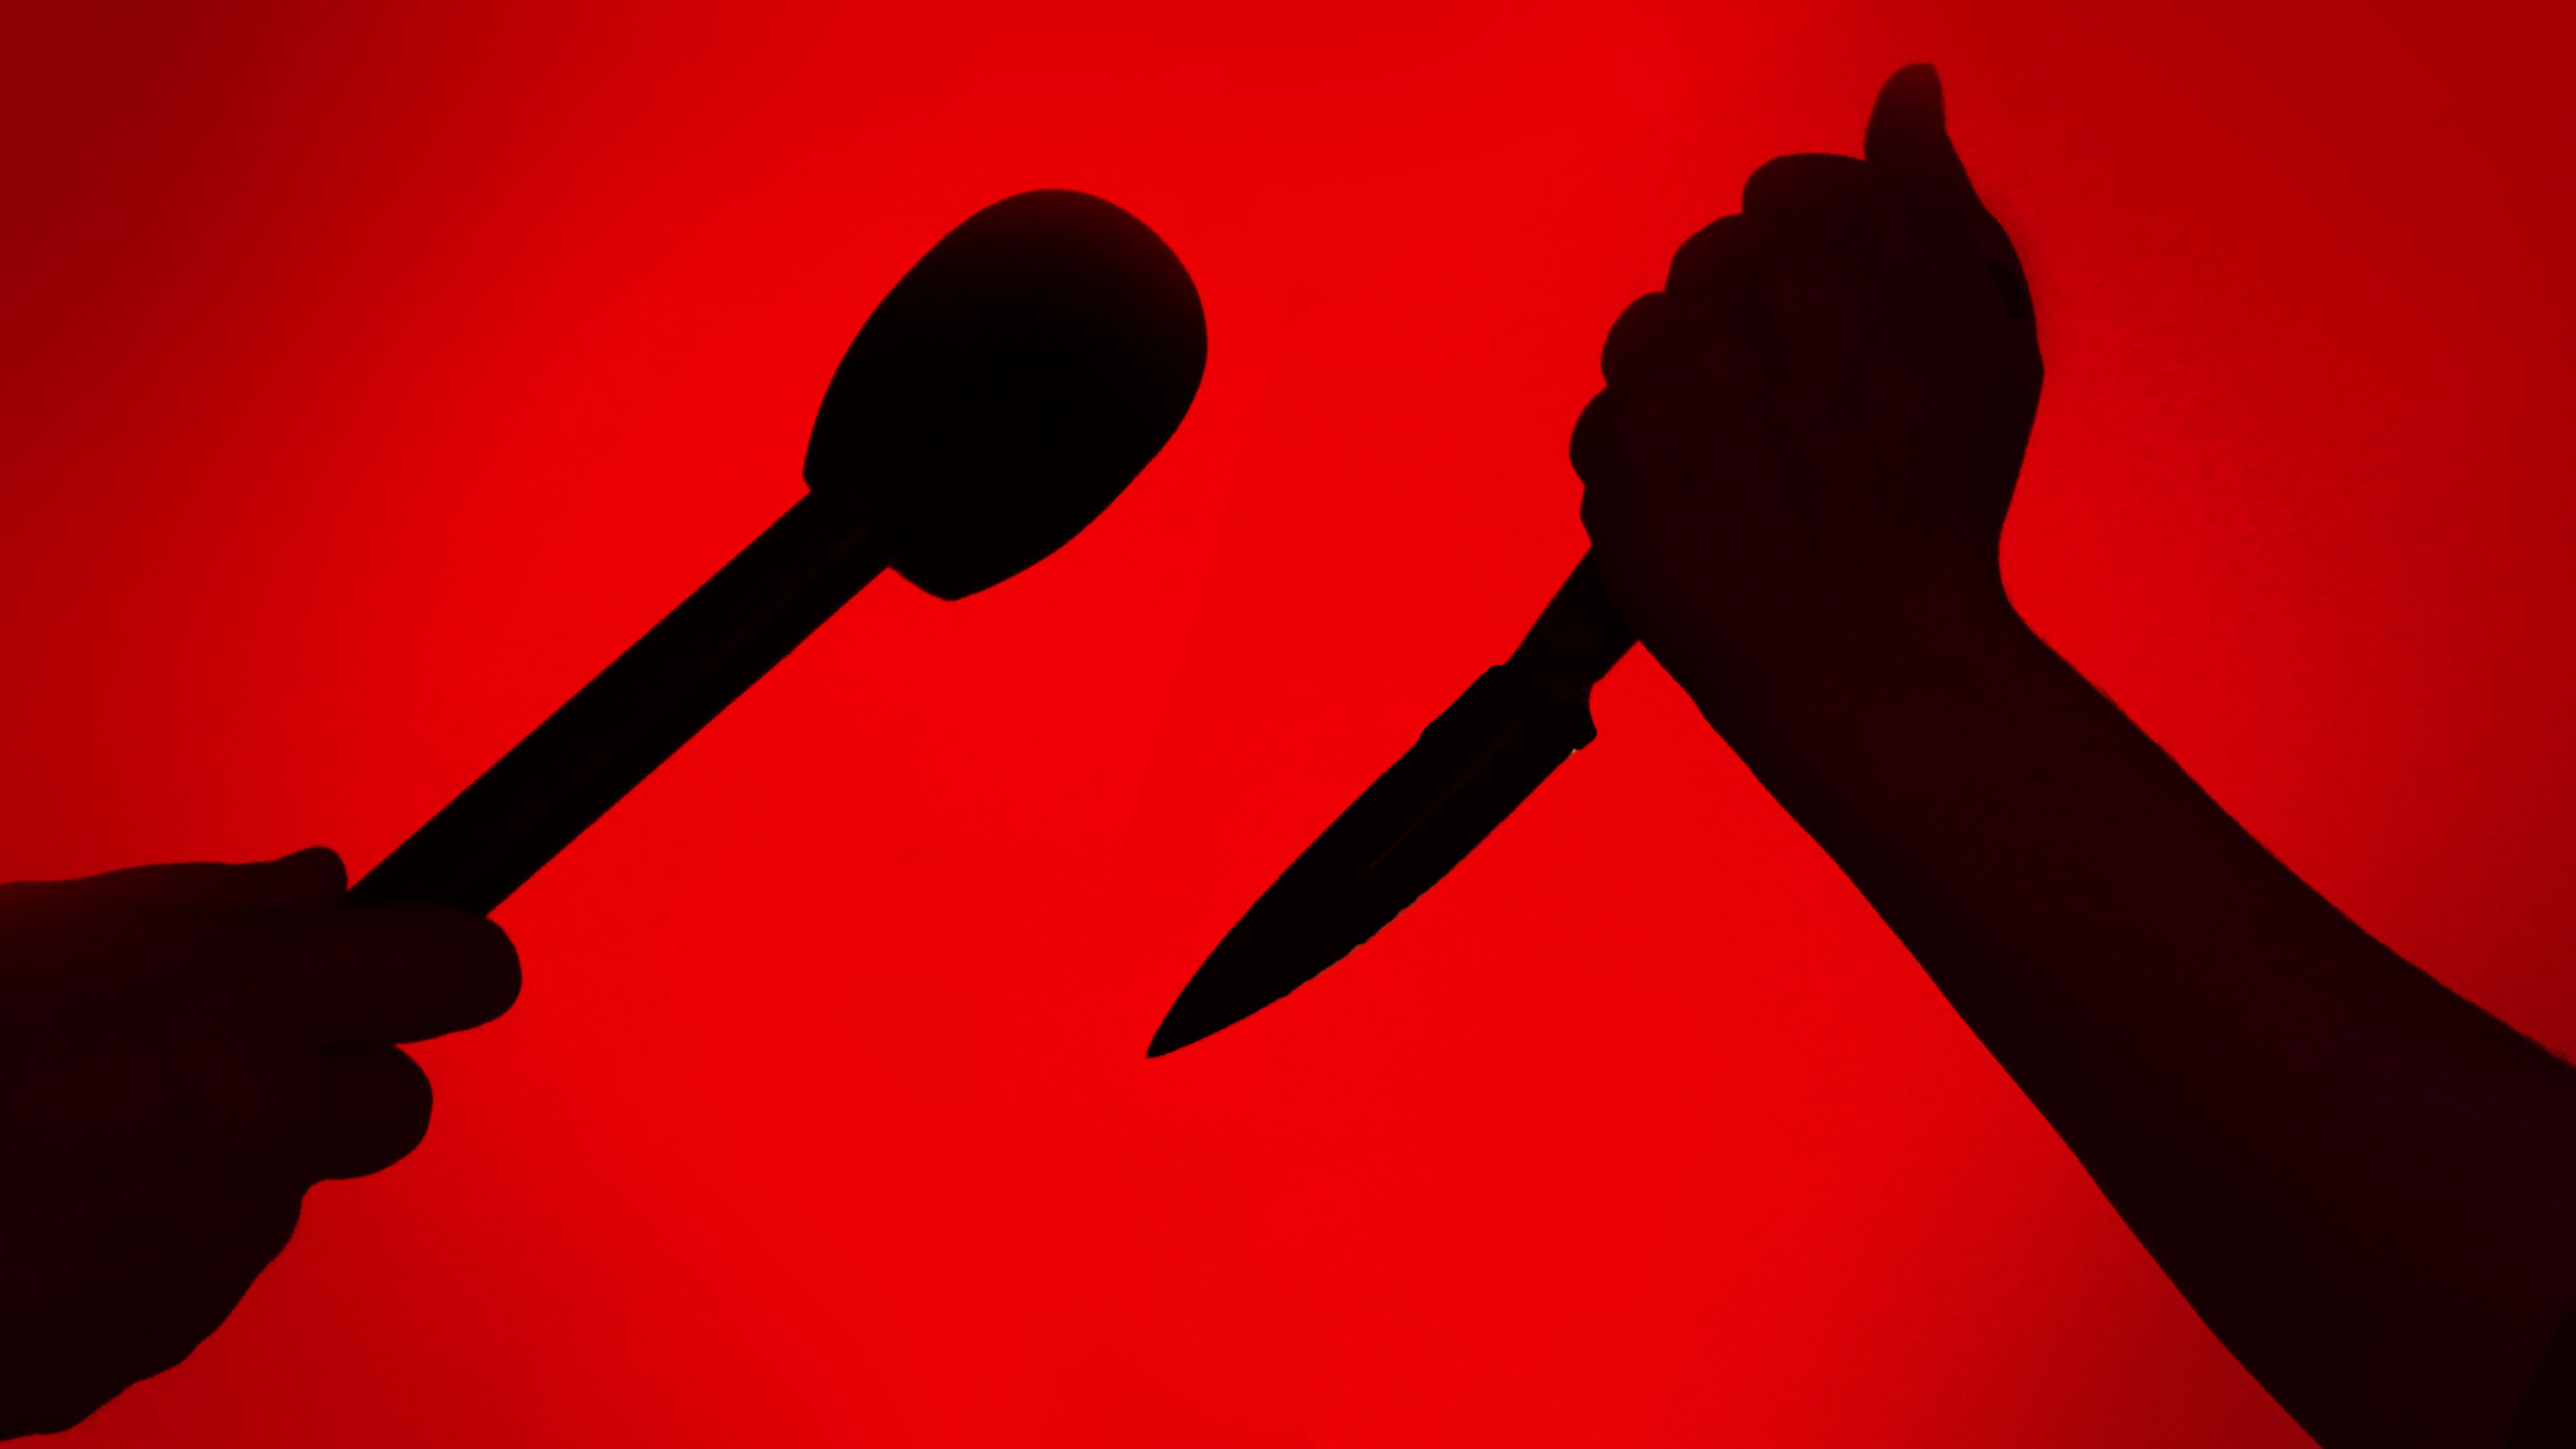 A person with a knife is seen with a person holding a microphone